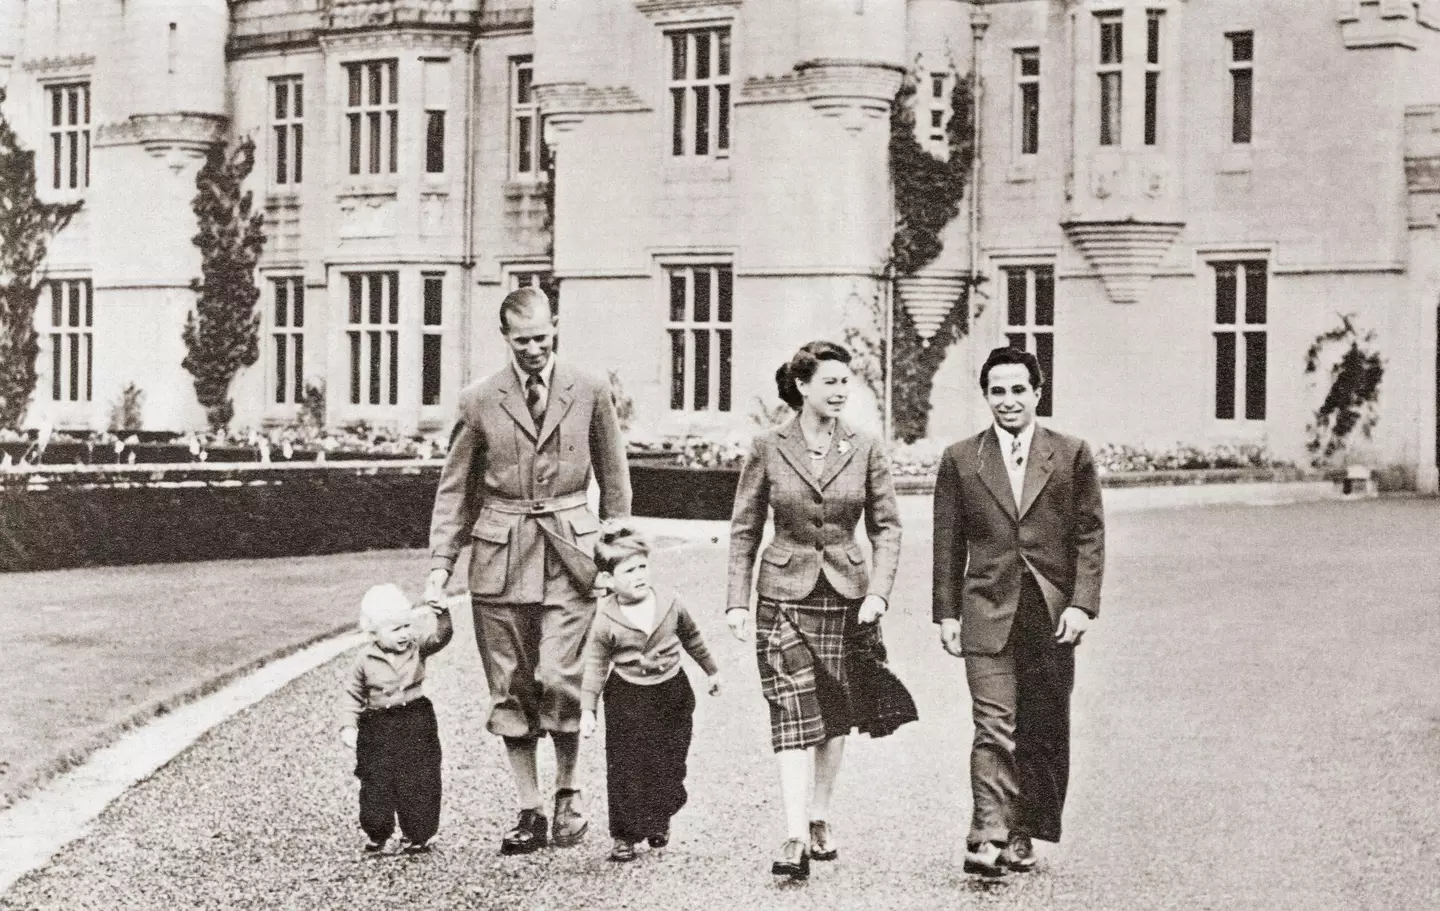 The Queen and her family pictured in 1952.